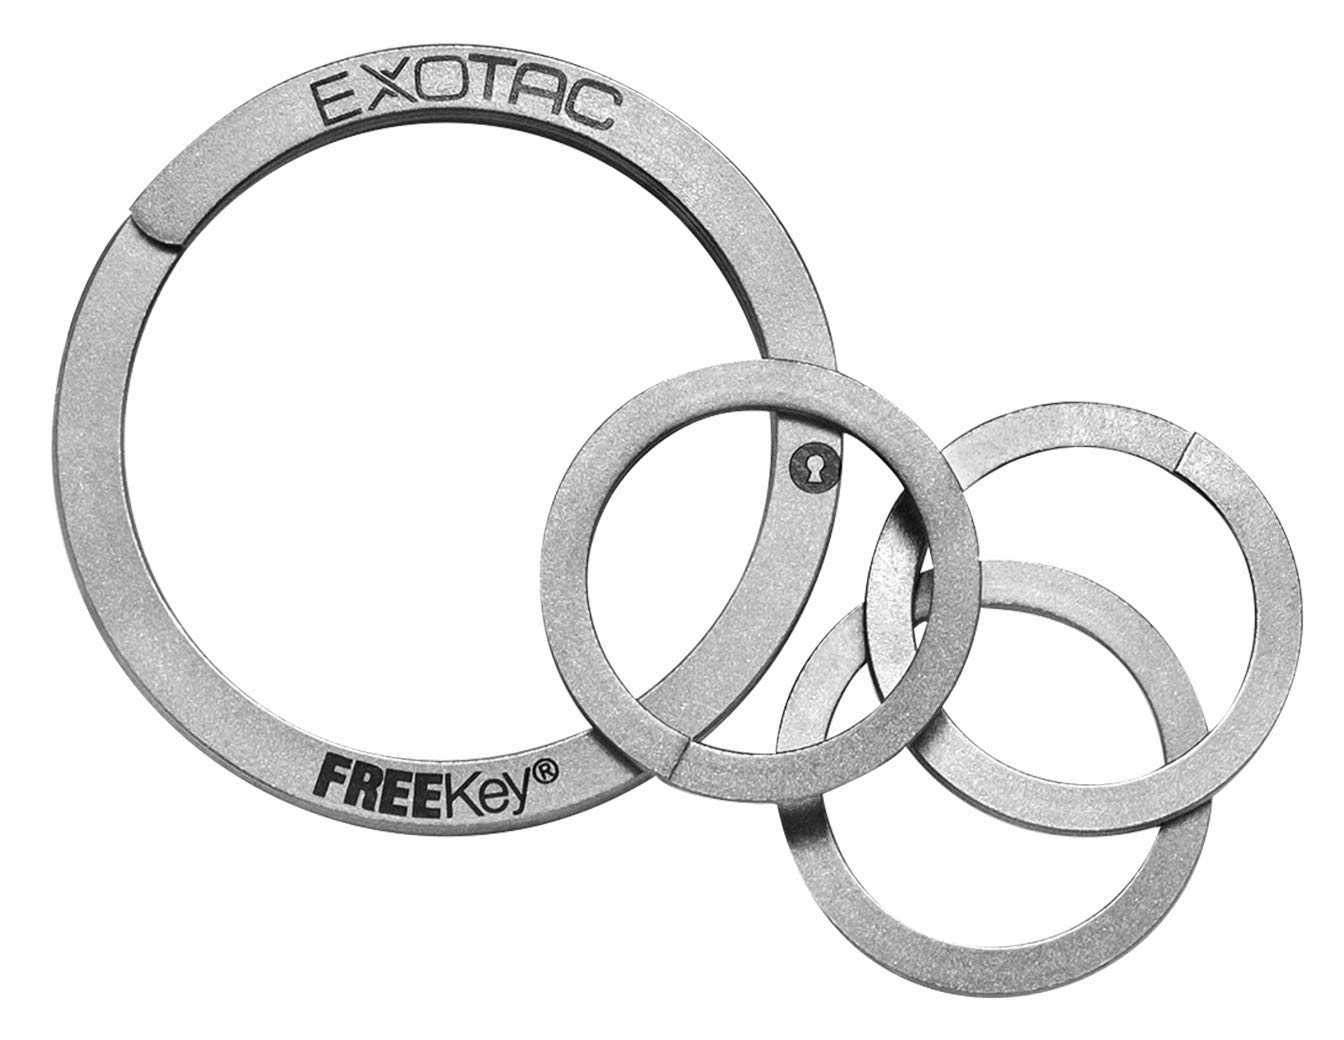 Exotac FREEkey Slim System Squeeze-to-open Keyring, Easily Add and Remove Keys, Further Organize Keys with Included Accessory Ring Spares